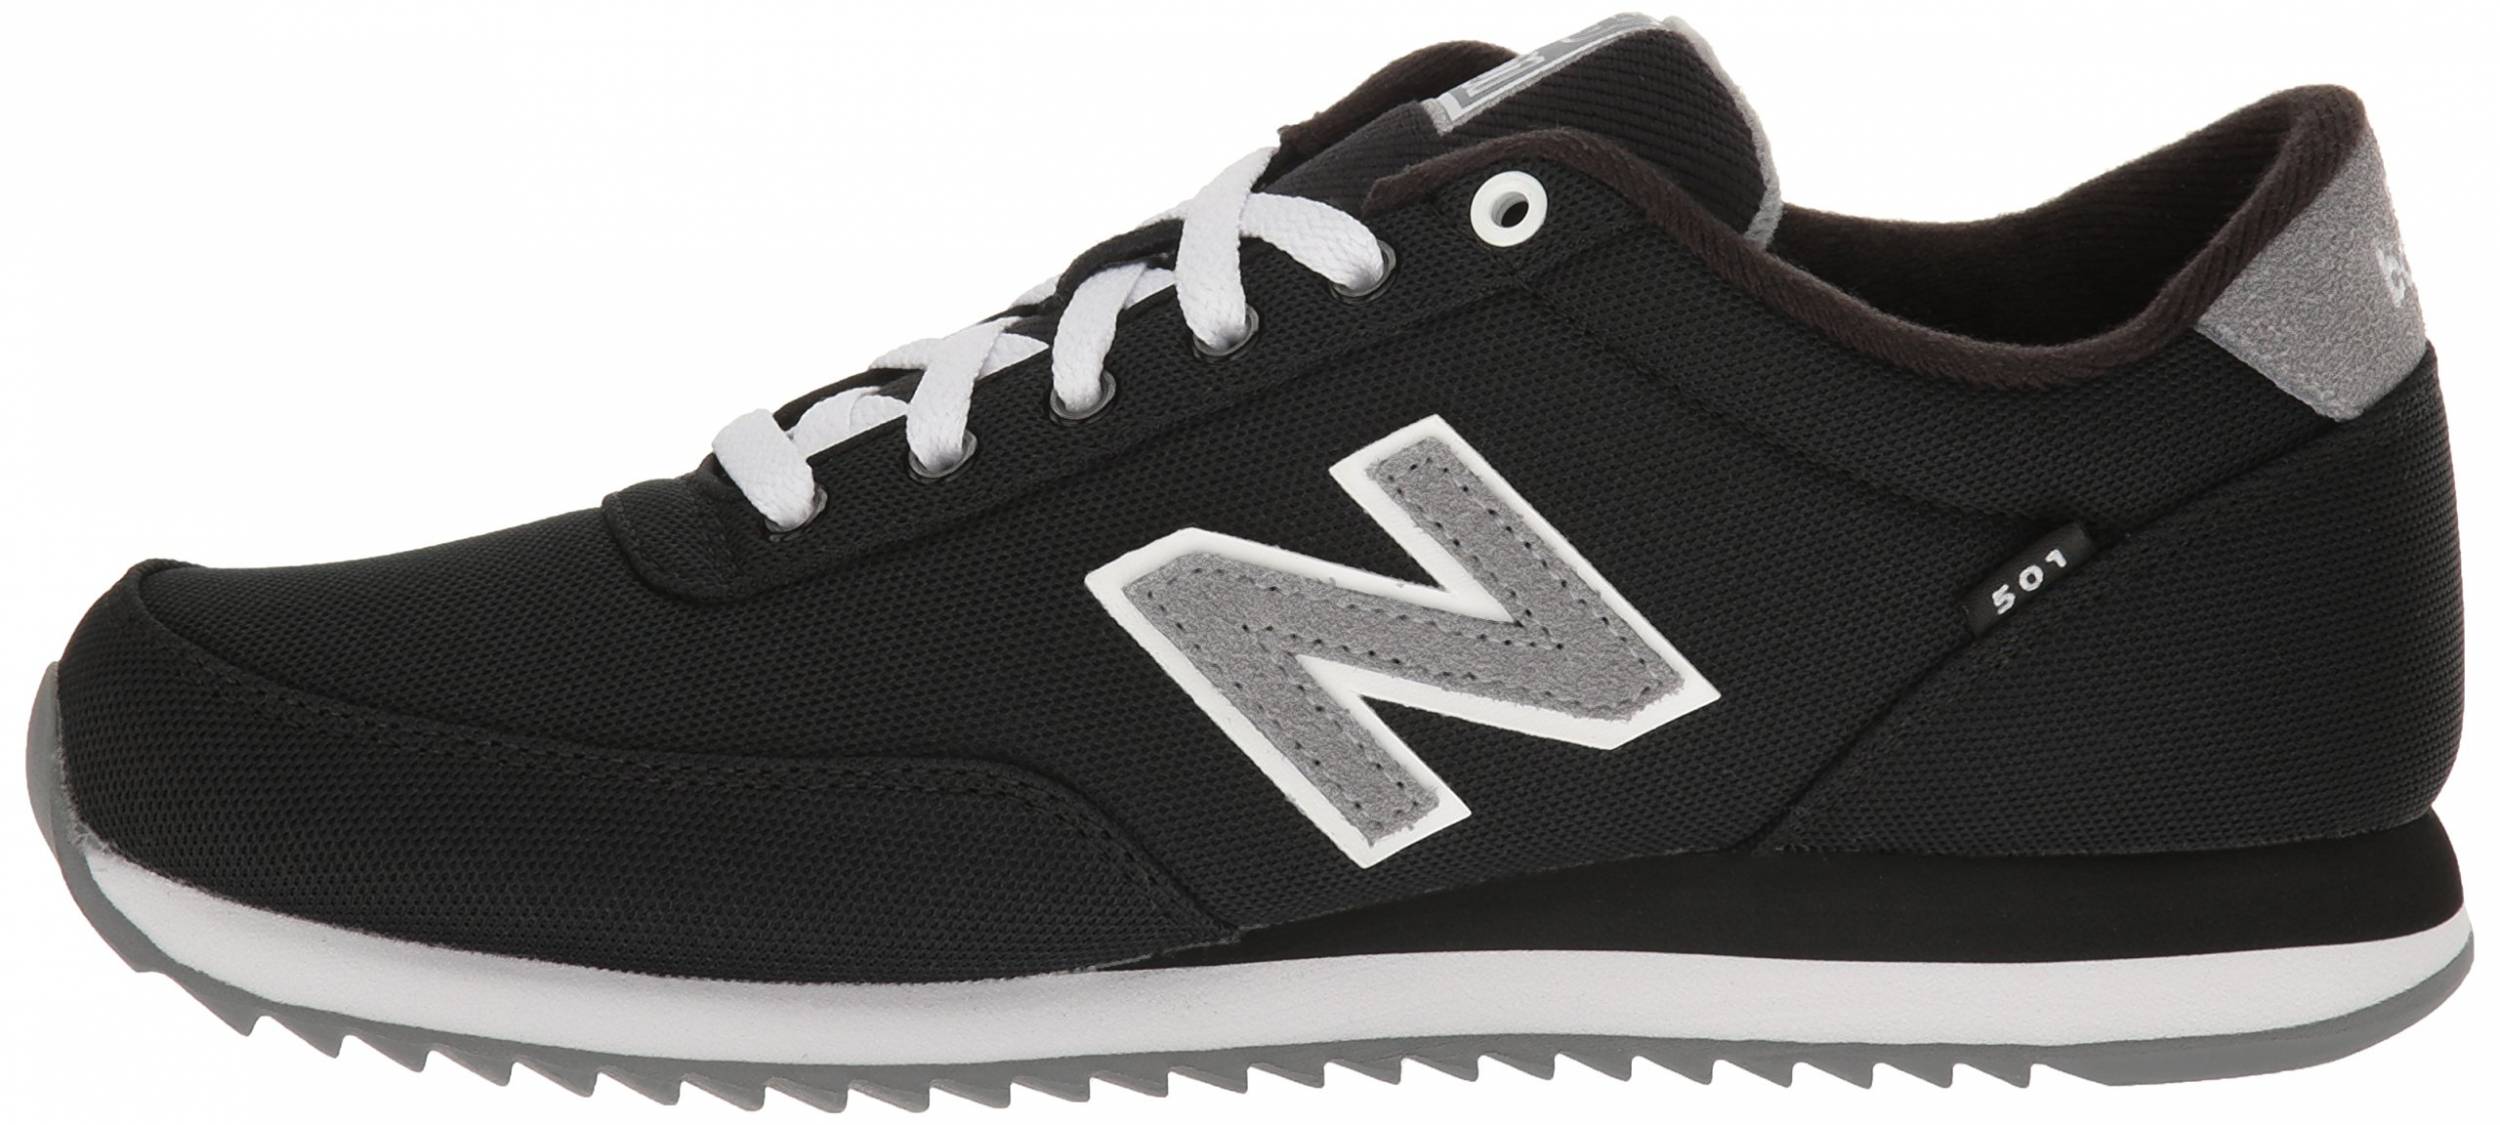 New Balance 501 Ripple Sole sneakers 